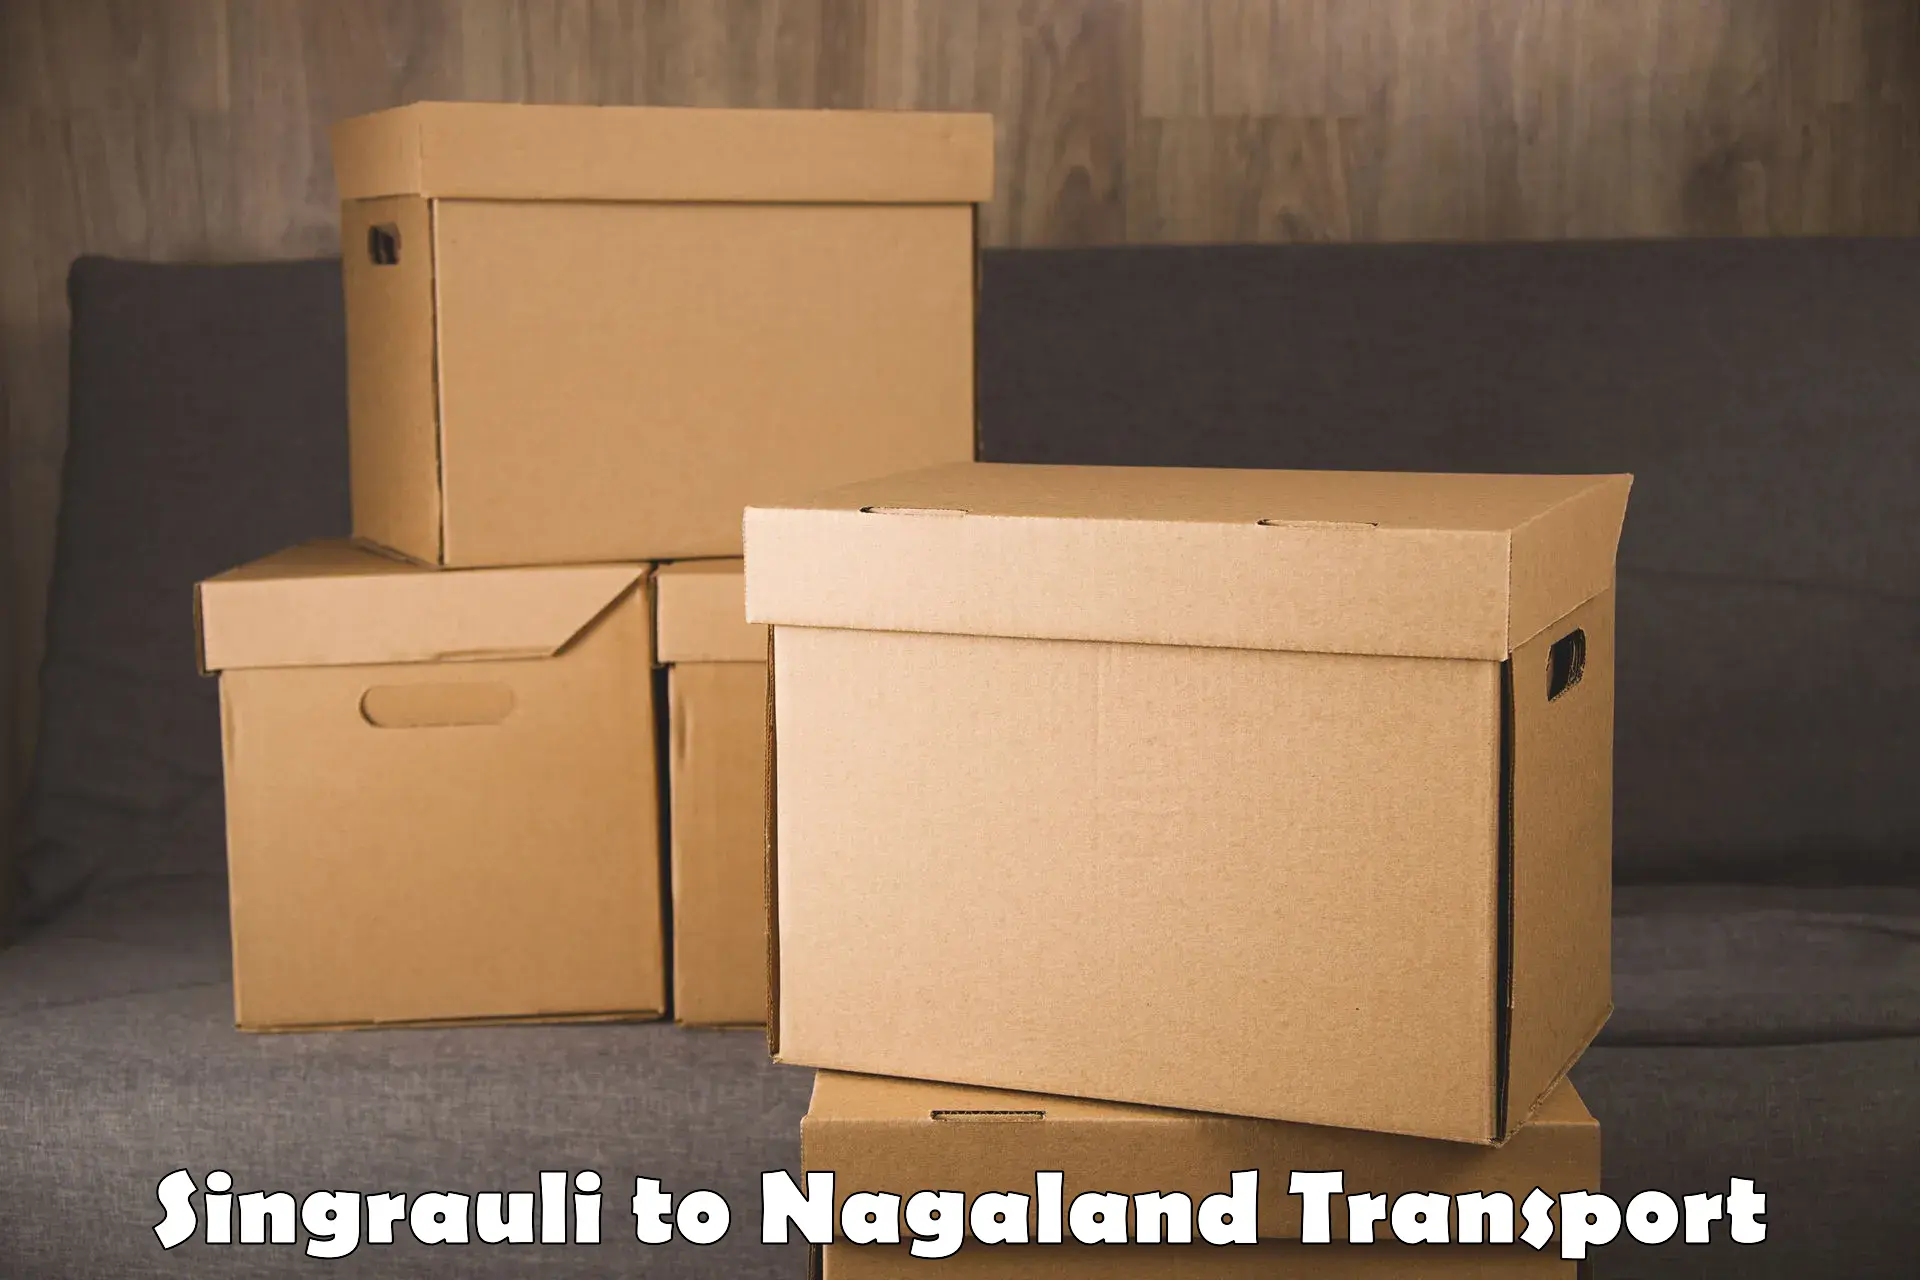 Delivery service Singrauli to Nagaland